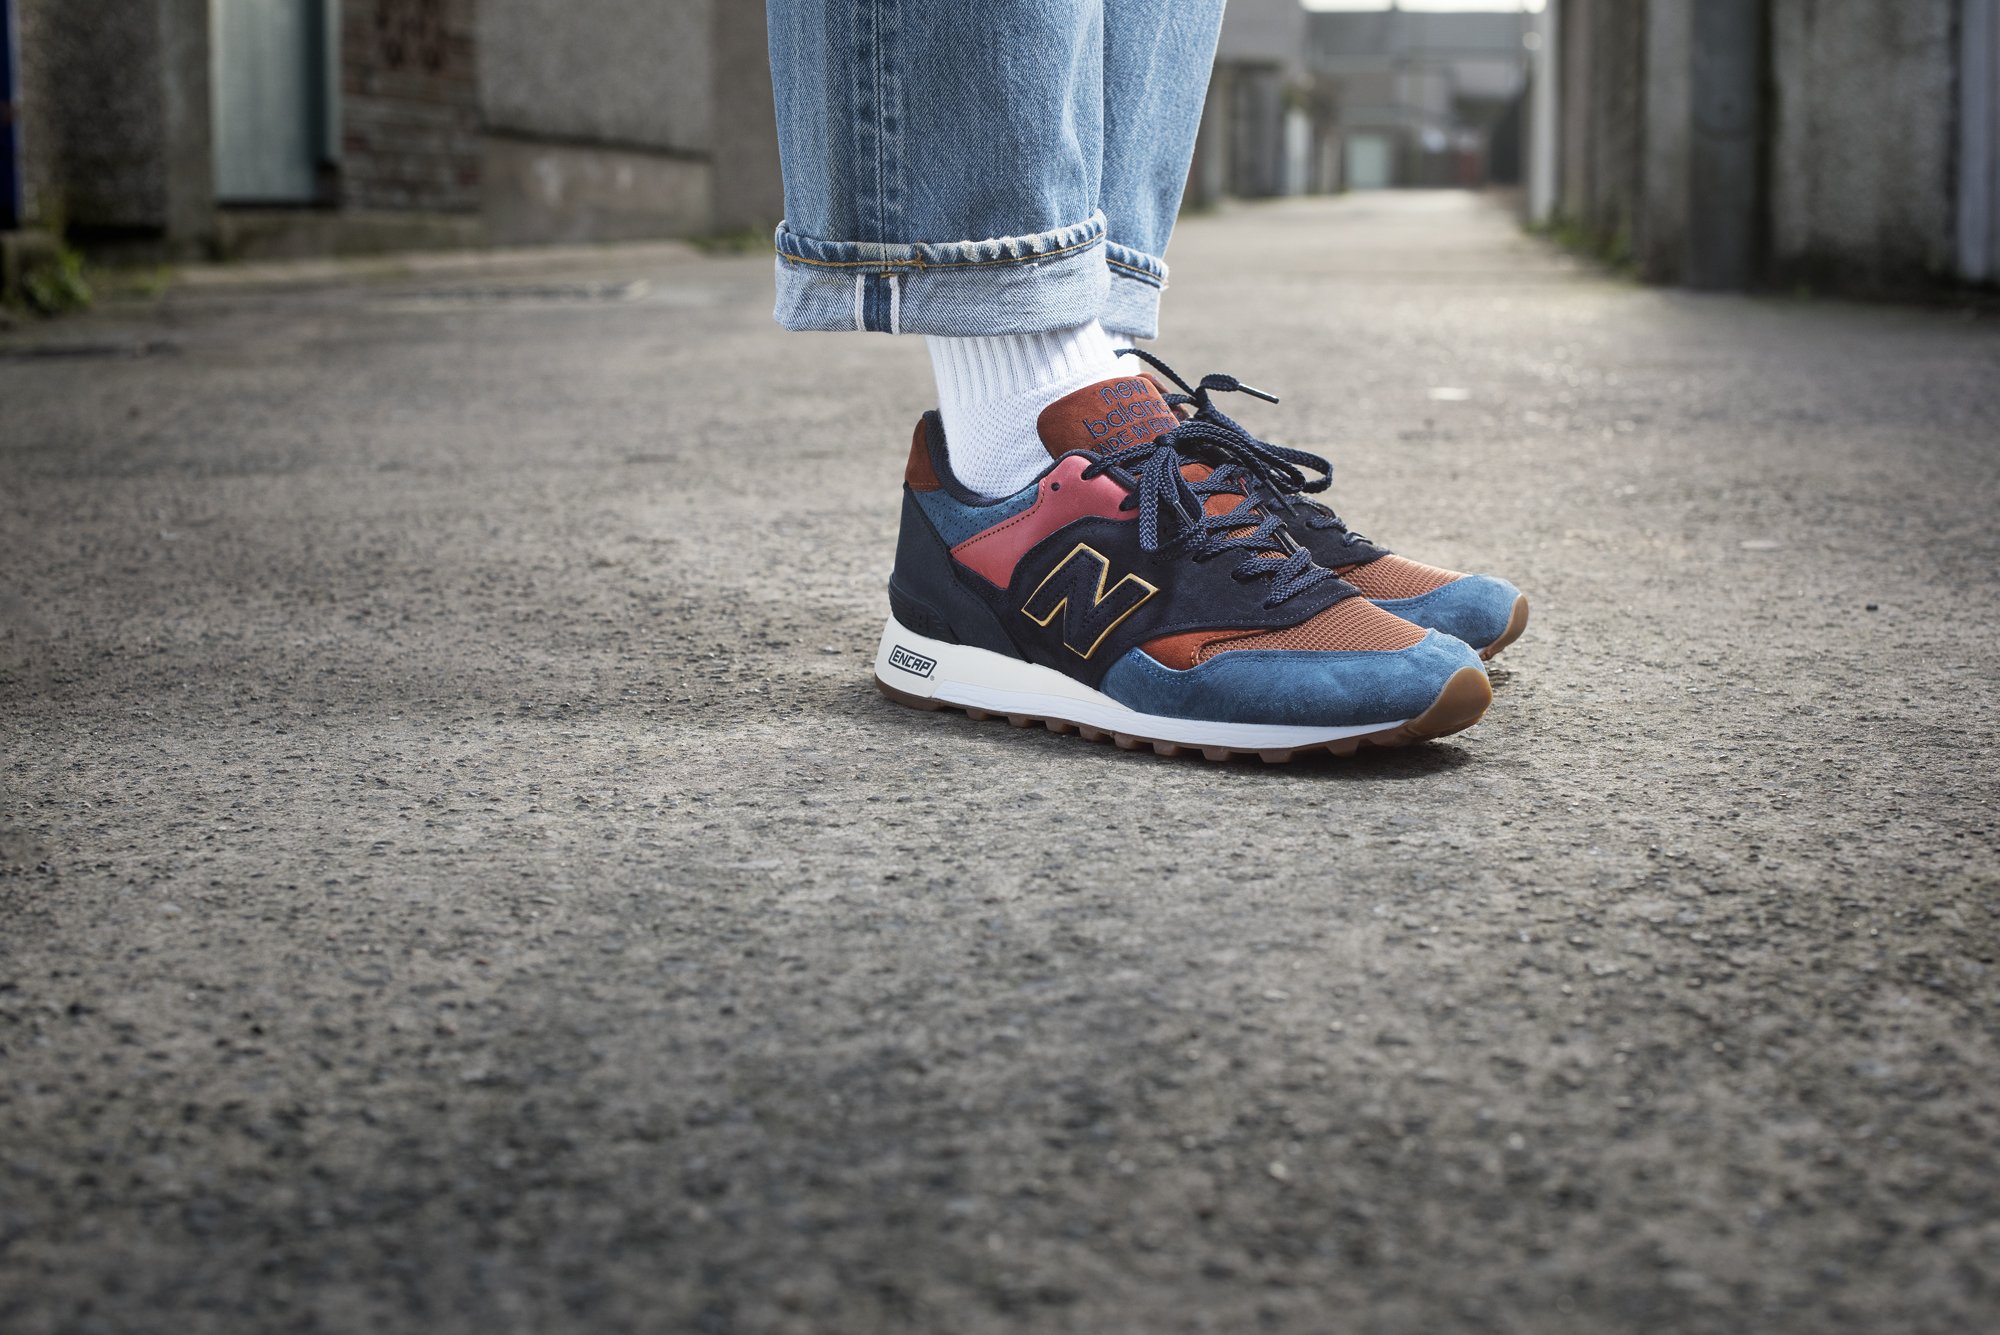 New Balance on Twitter: "Arriving today at New Balance retailers Drop one of the Made UK Yard Pack consisting of the EPICTRYP, M991.5YP, and #MadeUK https://t.co/wCORgfEVKT" / Twitter